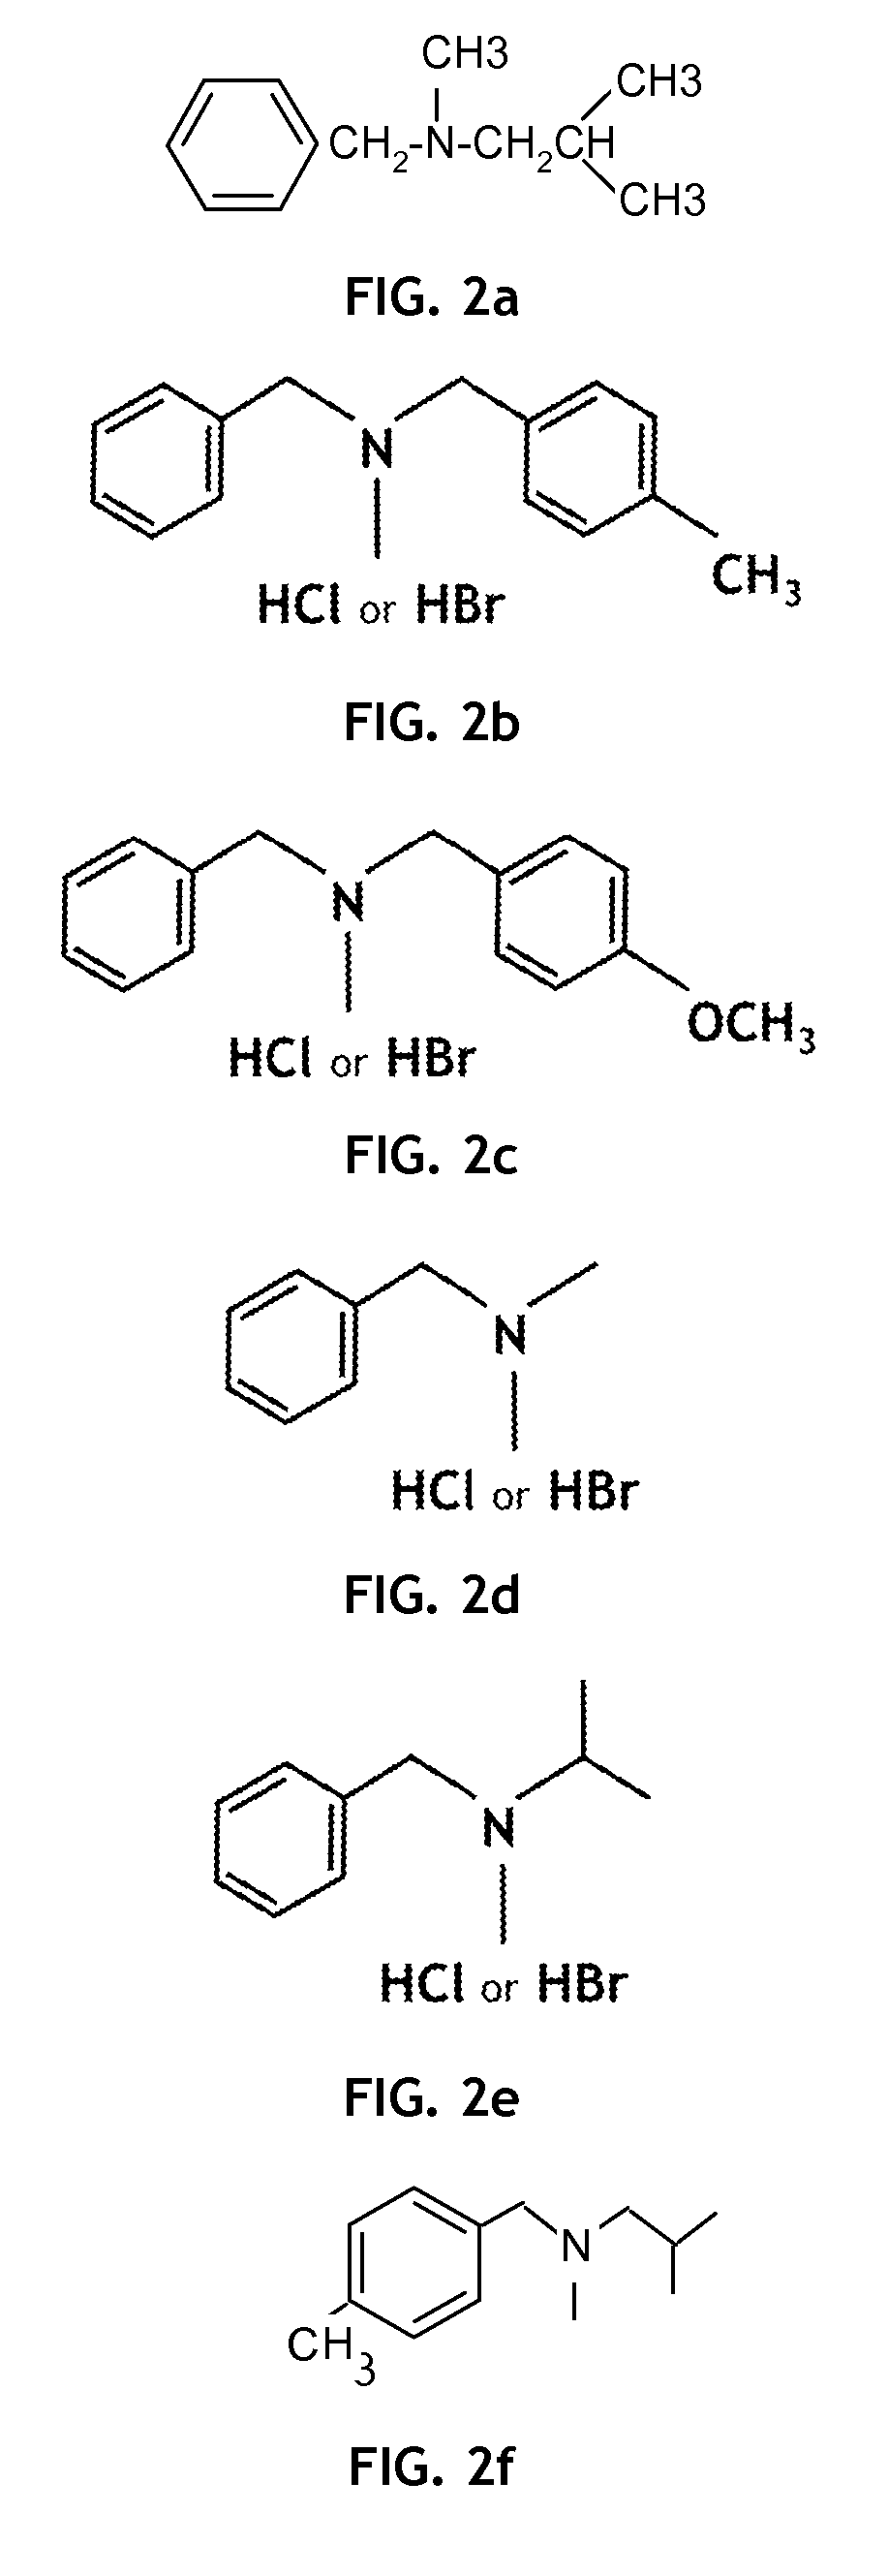 Signaling compositions, methods, and systems for effecting plant growth and crop enhancement